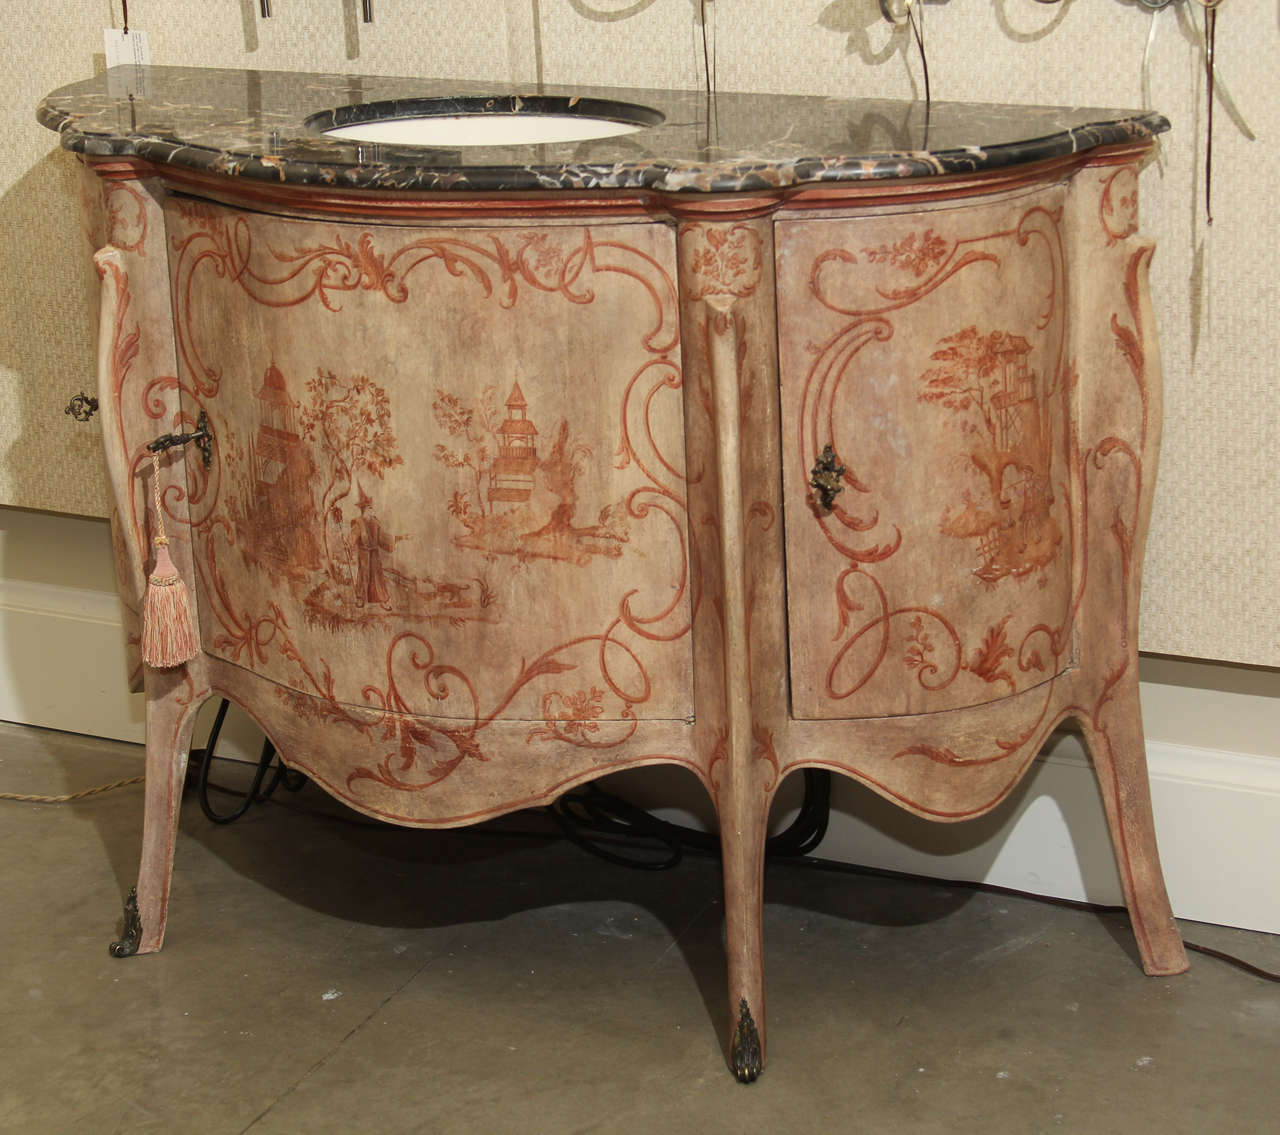 A high quality hand-painted reproduction of an 18th century Italian commode decorated with chinoiserie figures. The marble top has an inset porcelain sink. The spigots would have originally been on the wall. Two side doors open for storage.